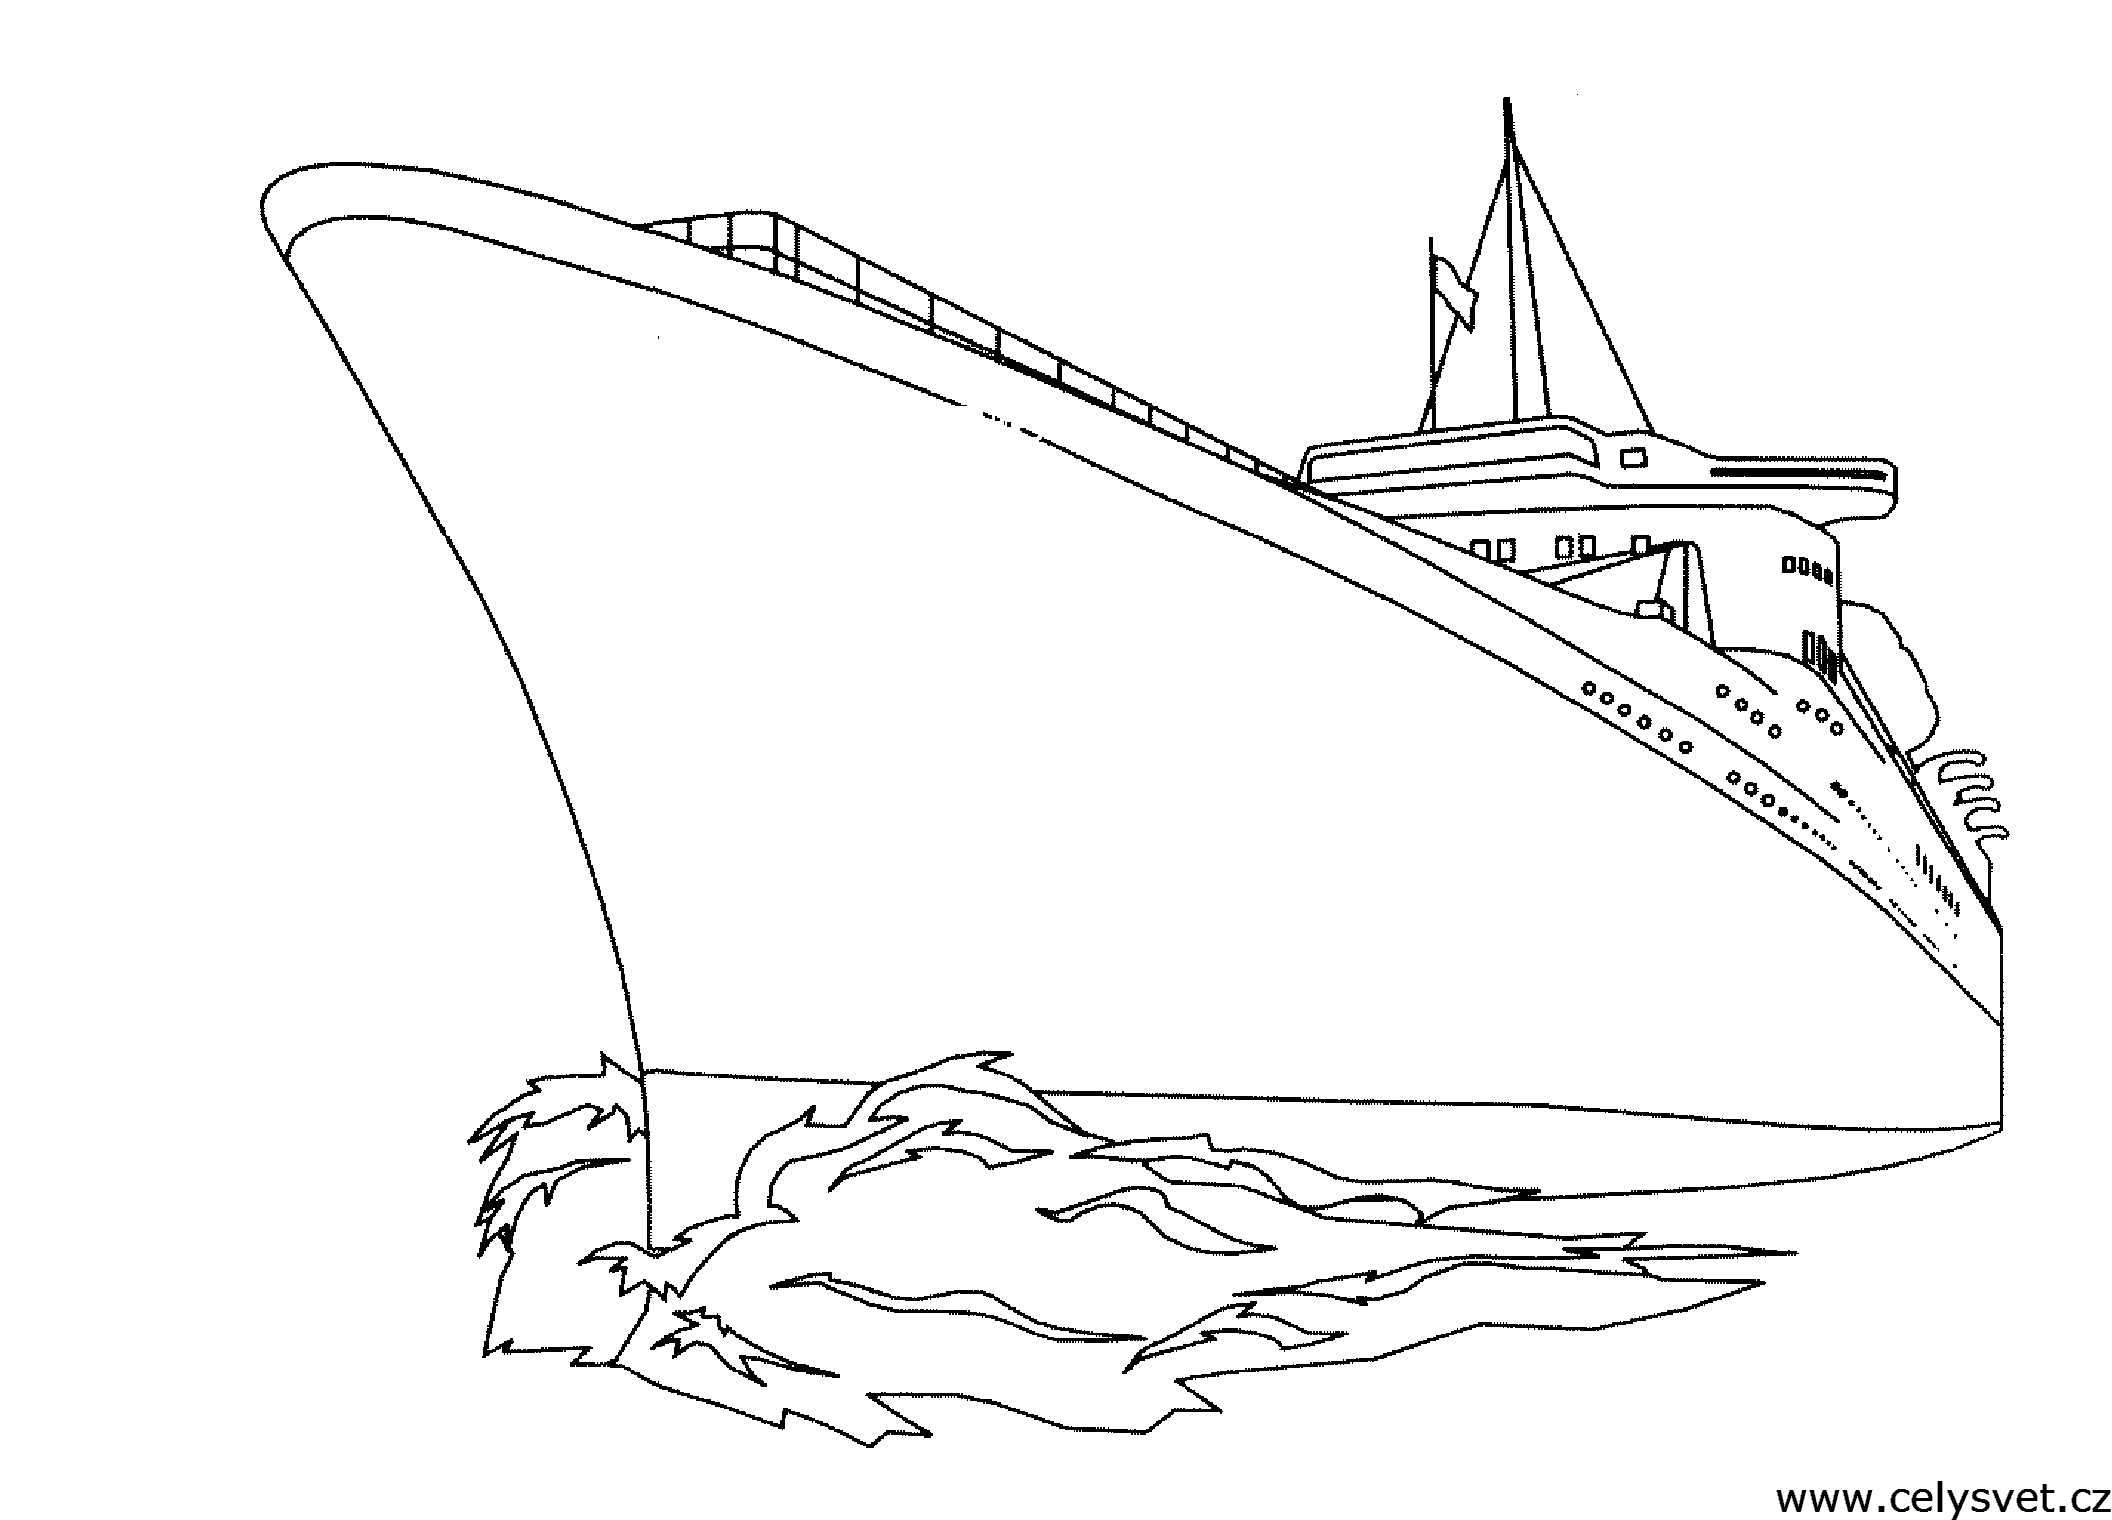 Free coloring page to print